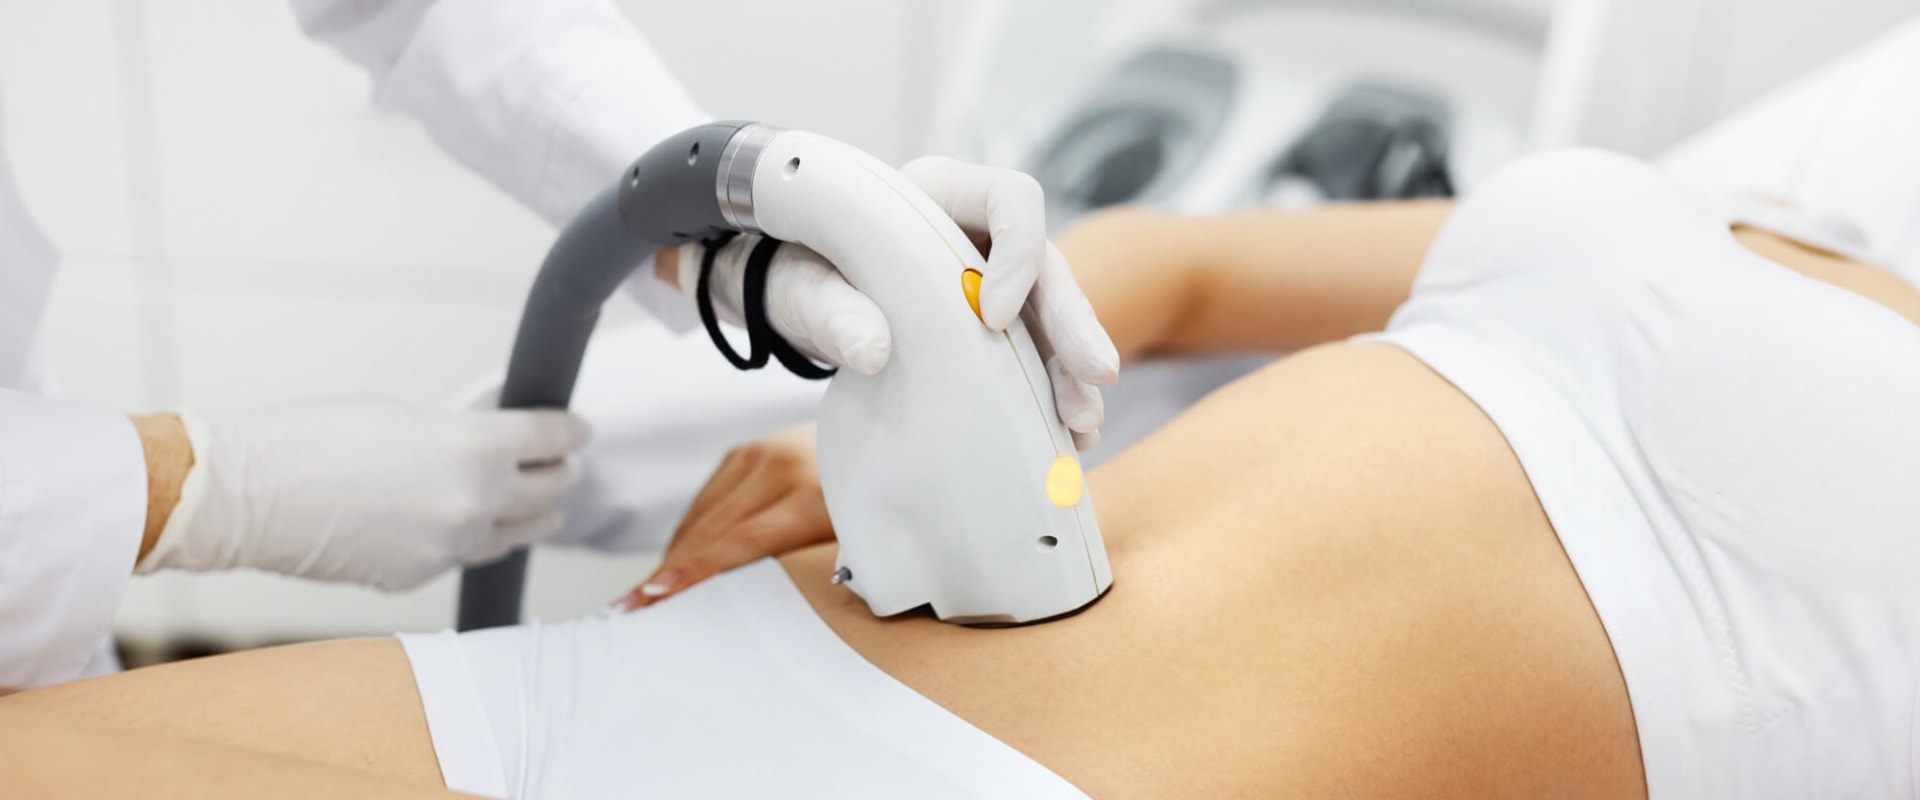 Is Laser Hair Removal Painful? An Expert's Guide to Comfort